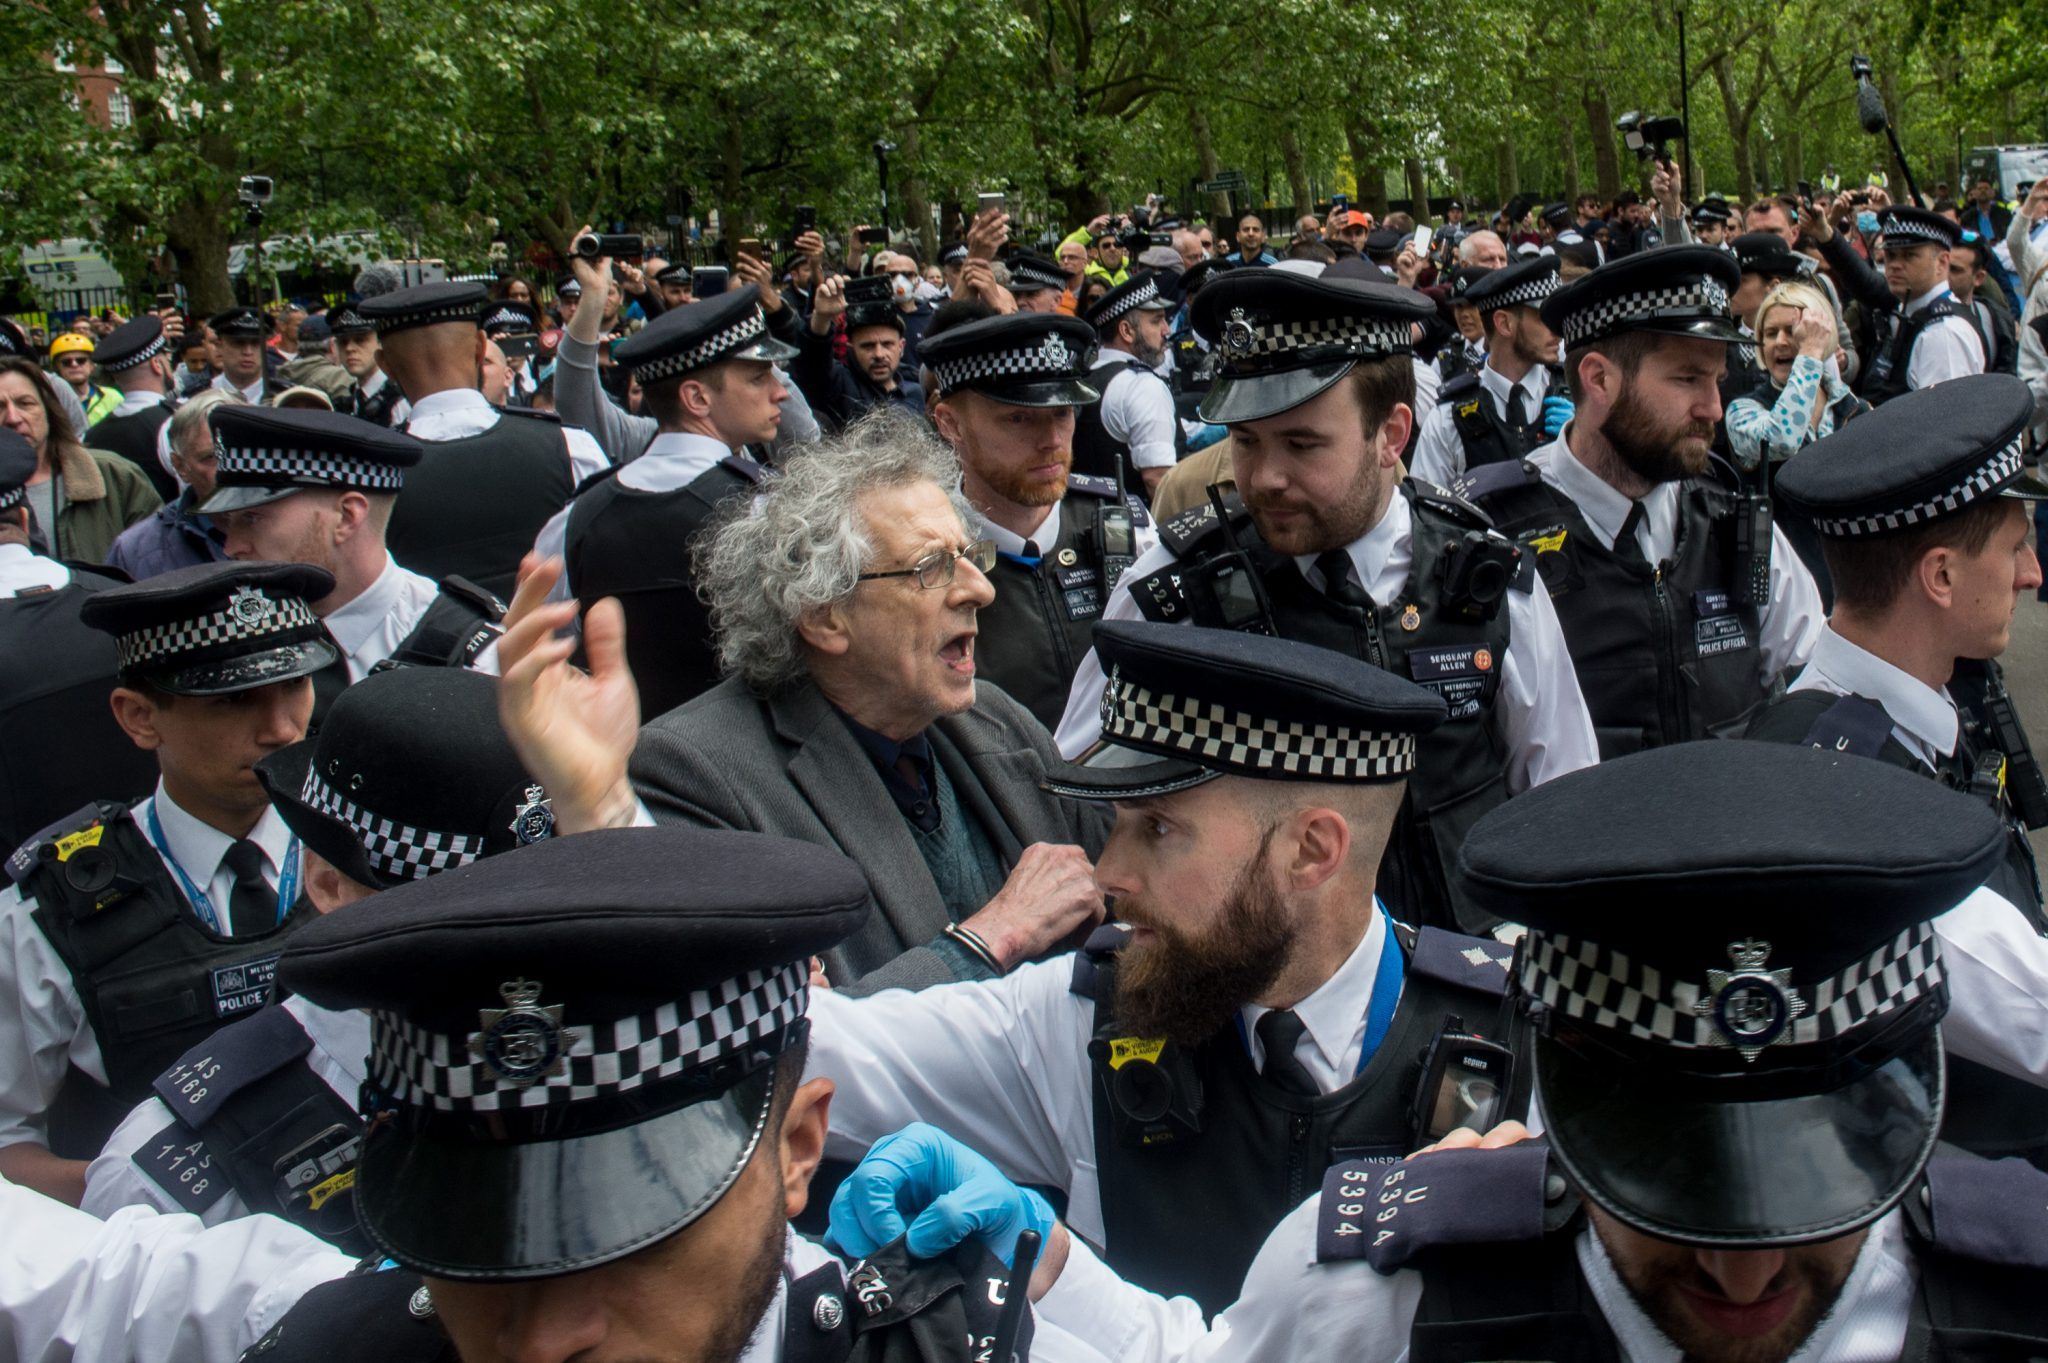 Piers Corbyn being arrested at an antivaxx protest